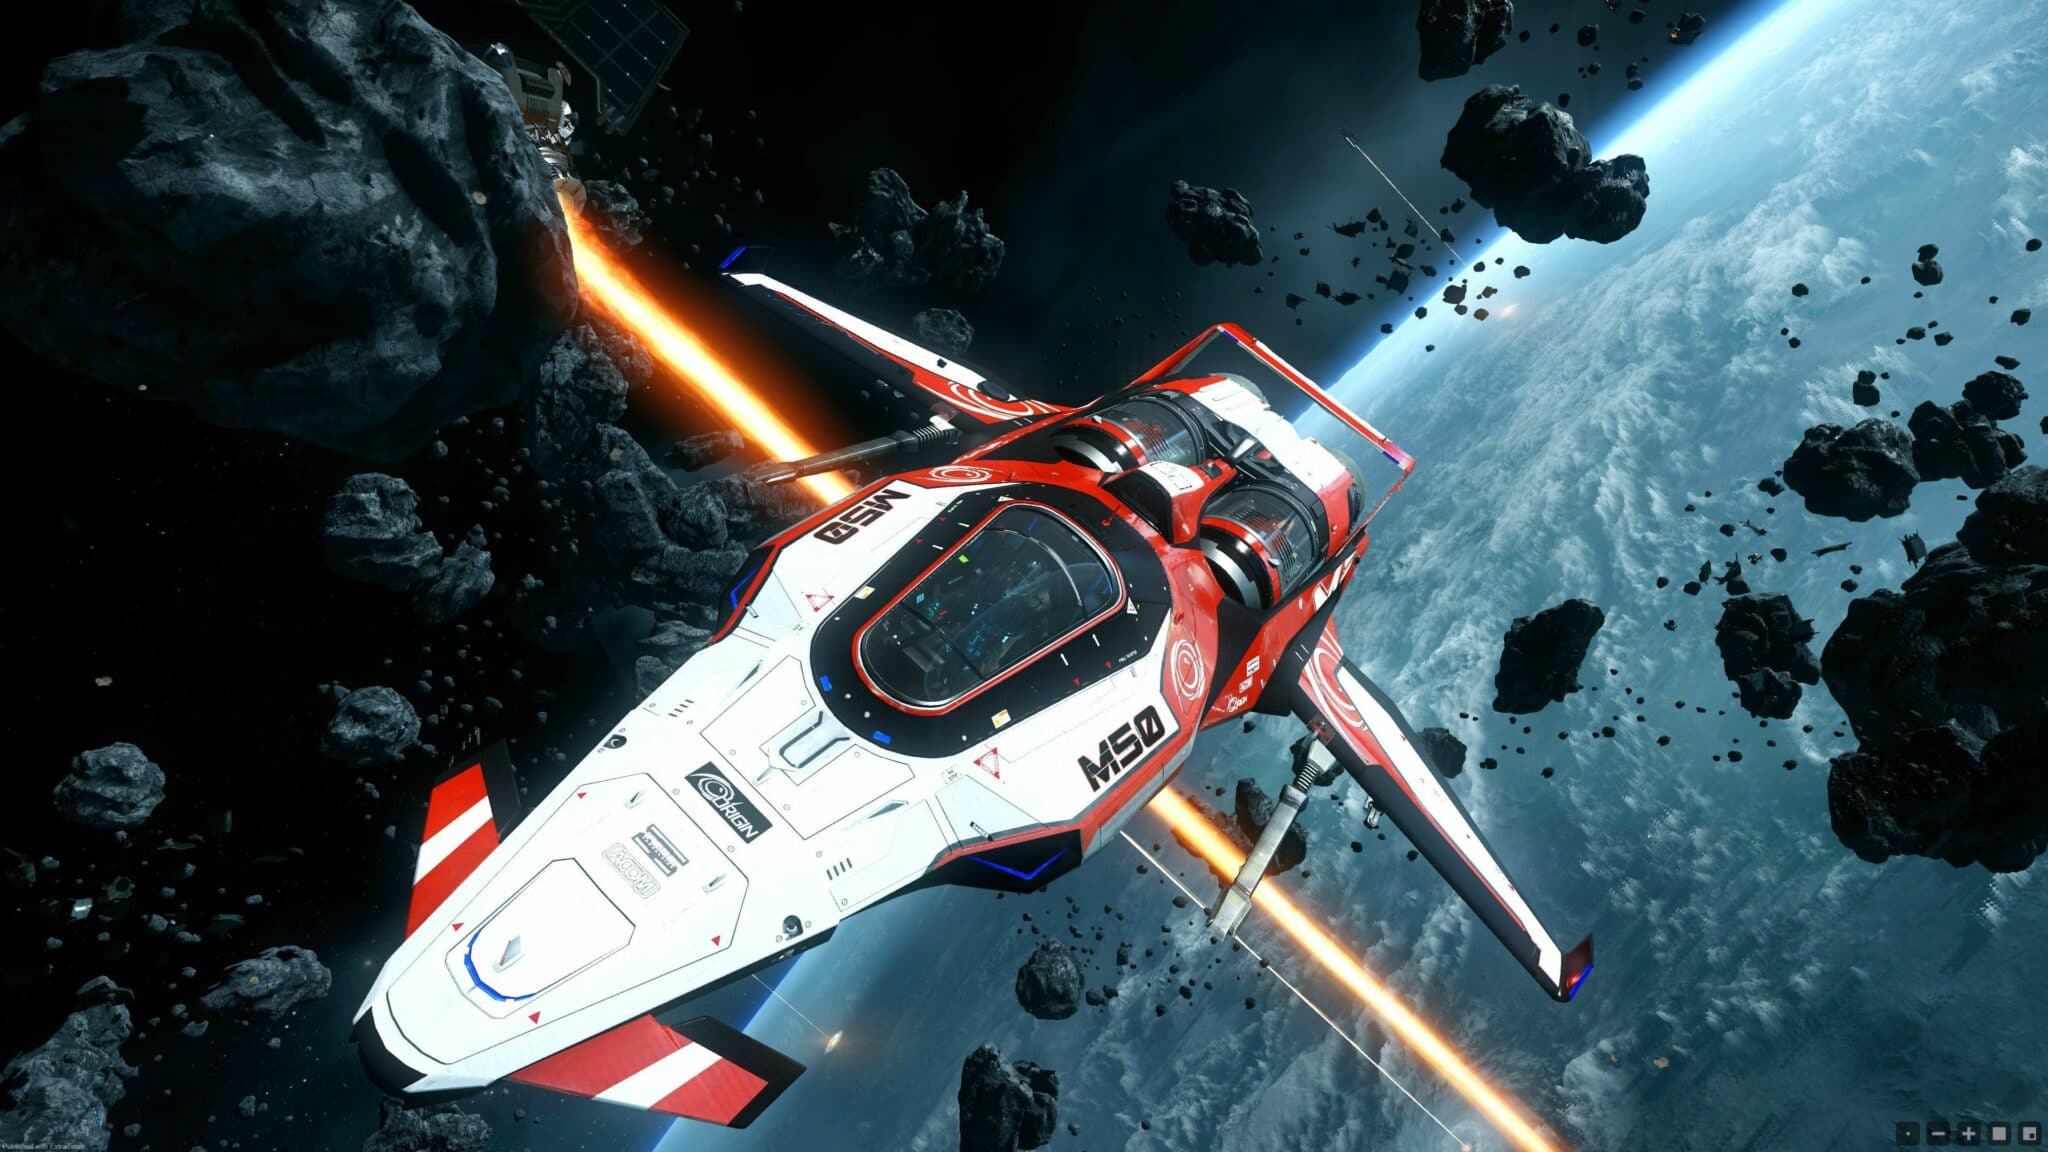 The world's most expensive game - Star Citizen will become temporarily free